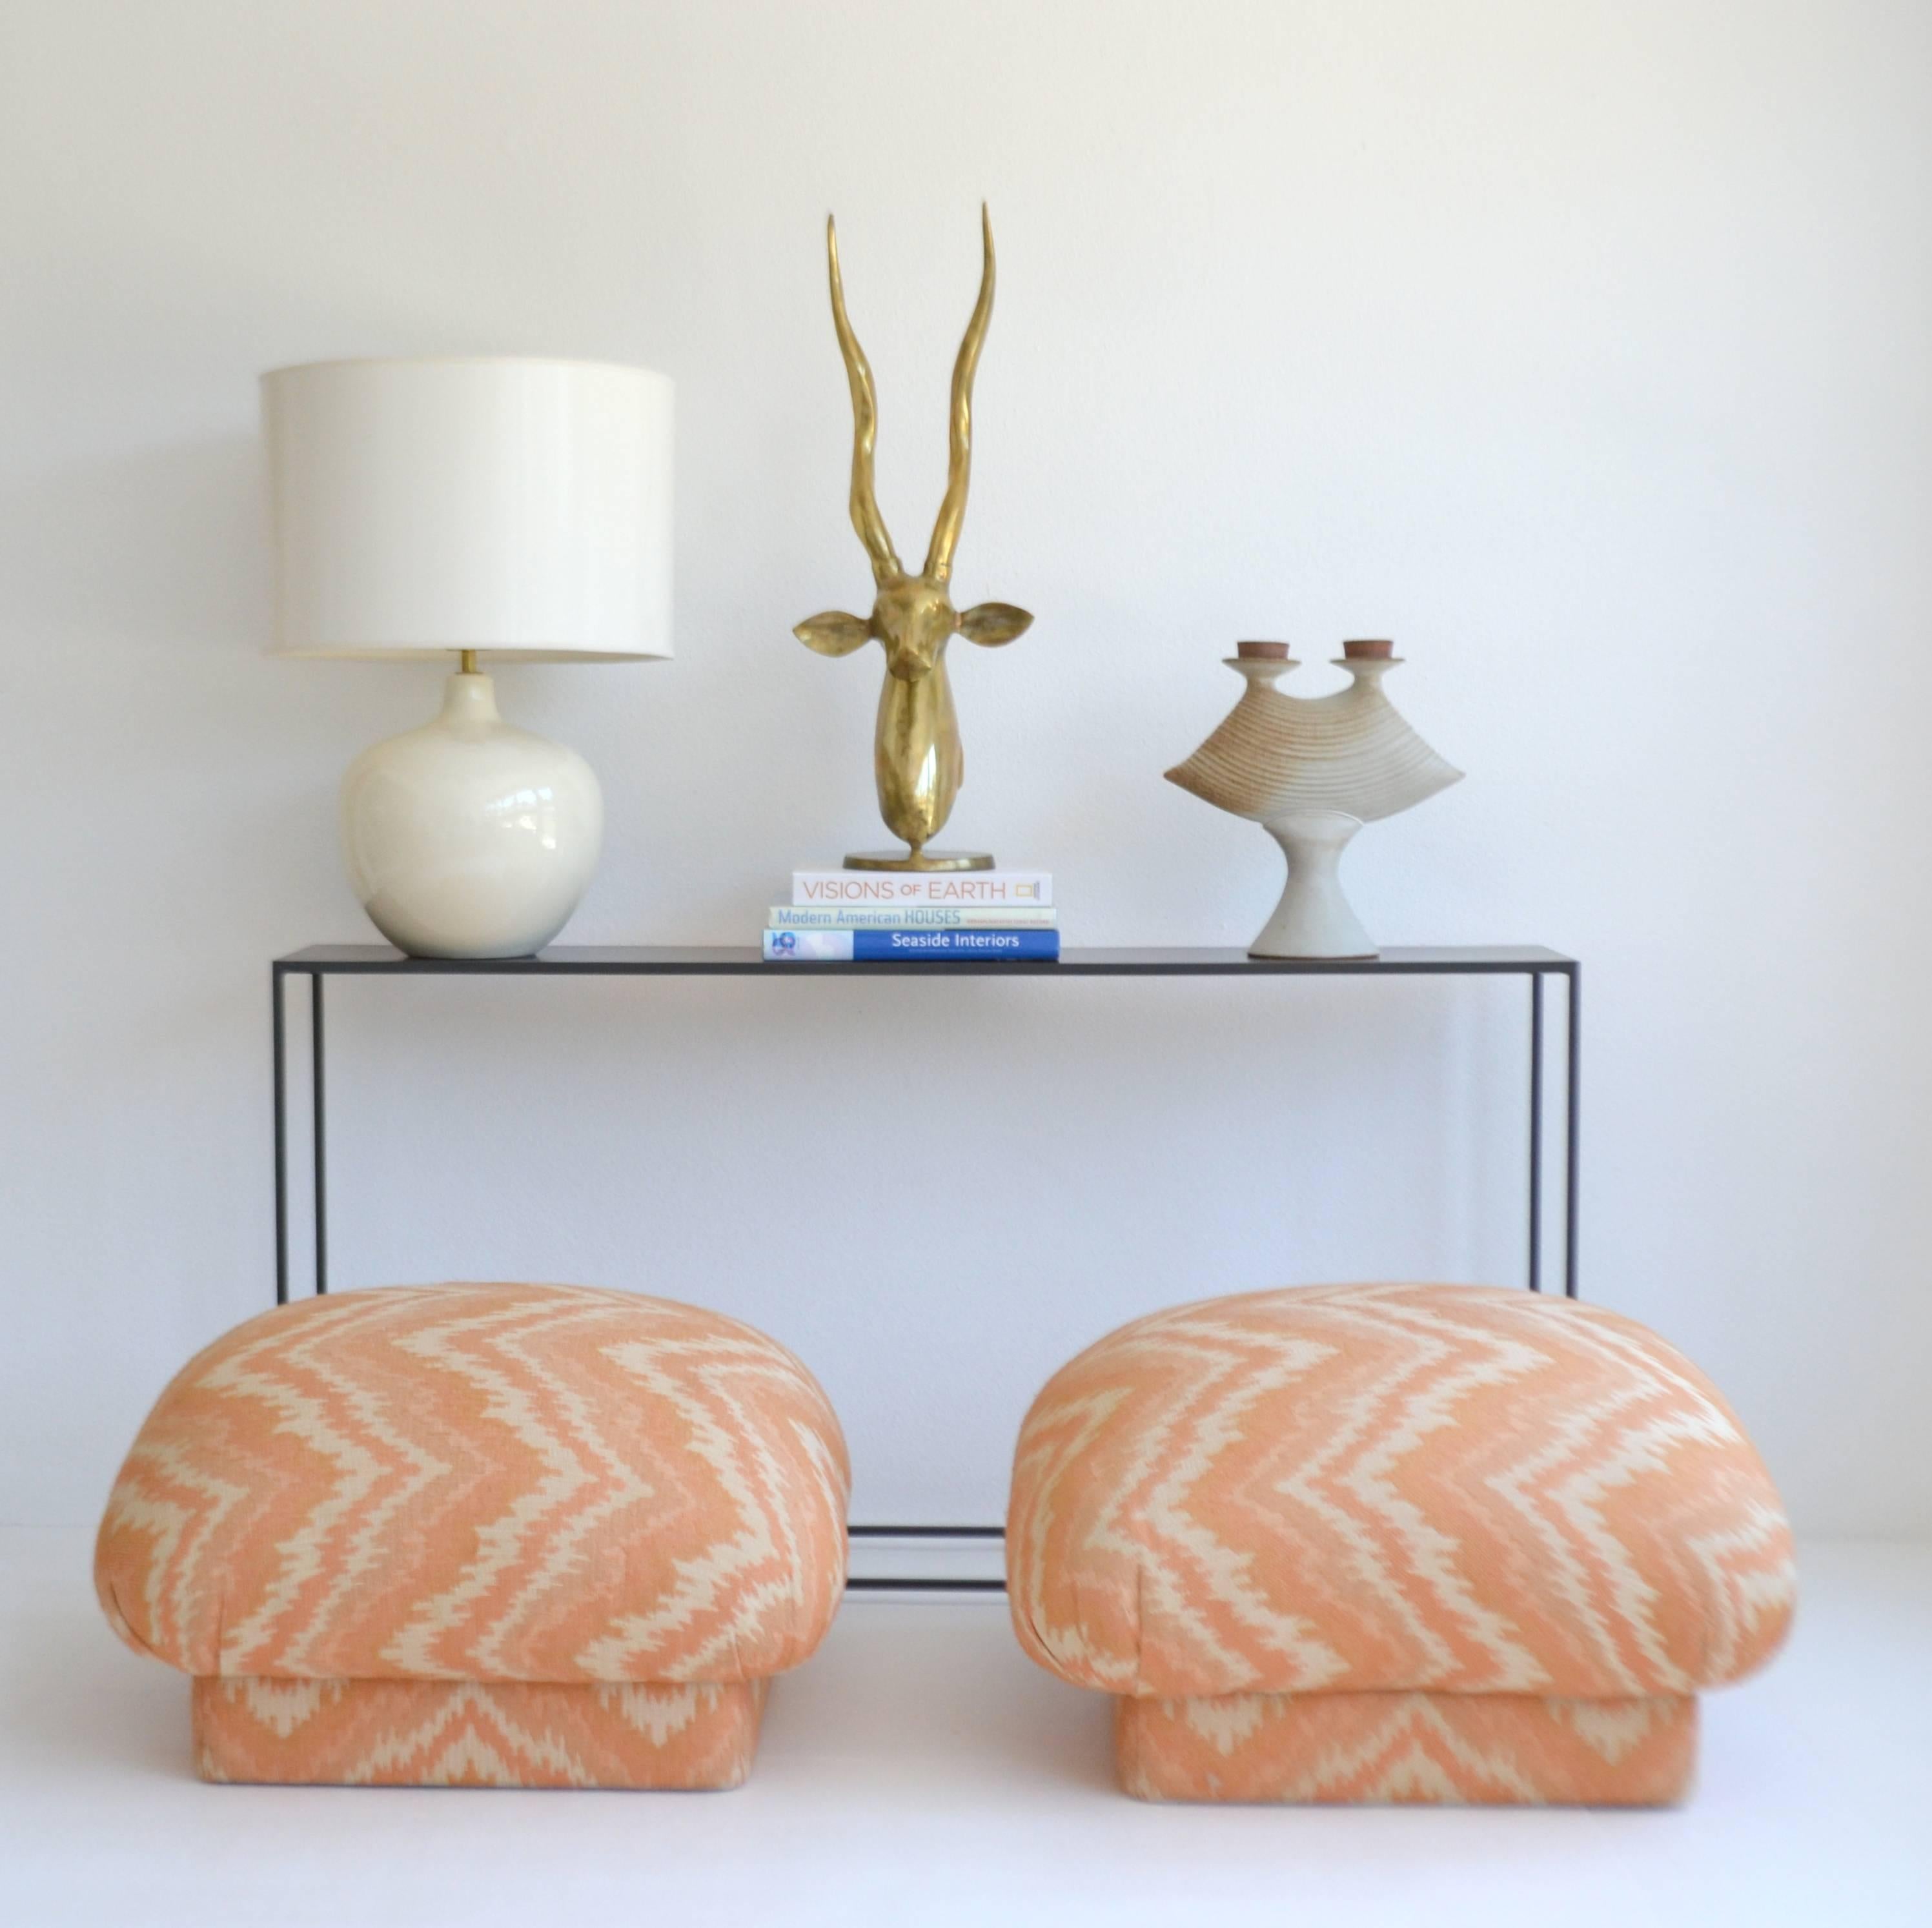 Stunning pair of midcentury upholstered stools, circa 1970s. These custom souffle form benches with inset bases are upholstered in the original coral and cream flame stitch pattern fabric. Light staining from normal wear, stools need reupholstering.